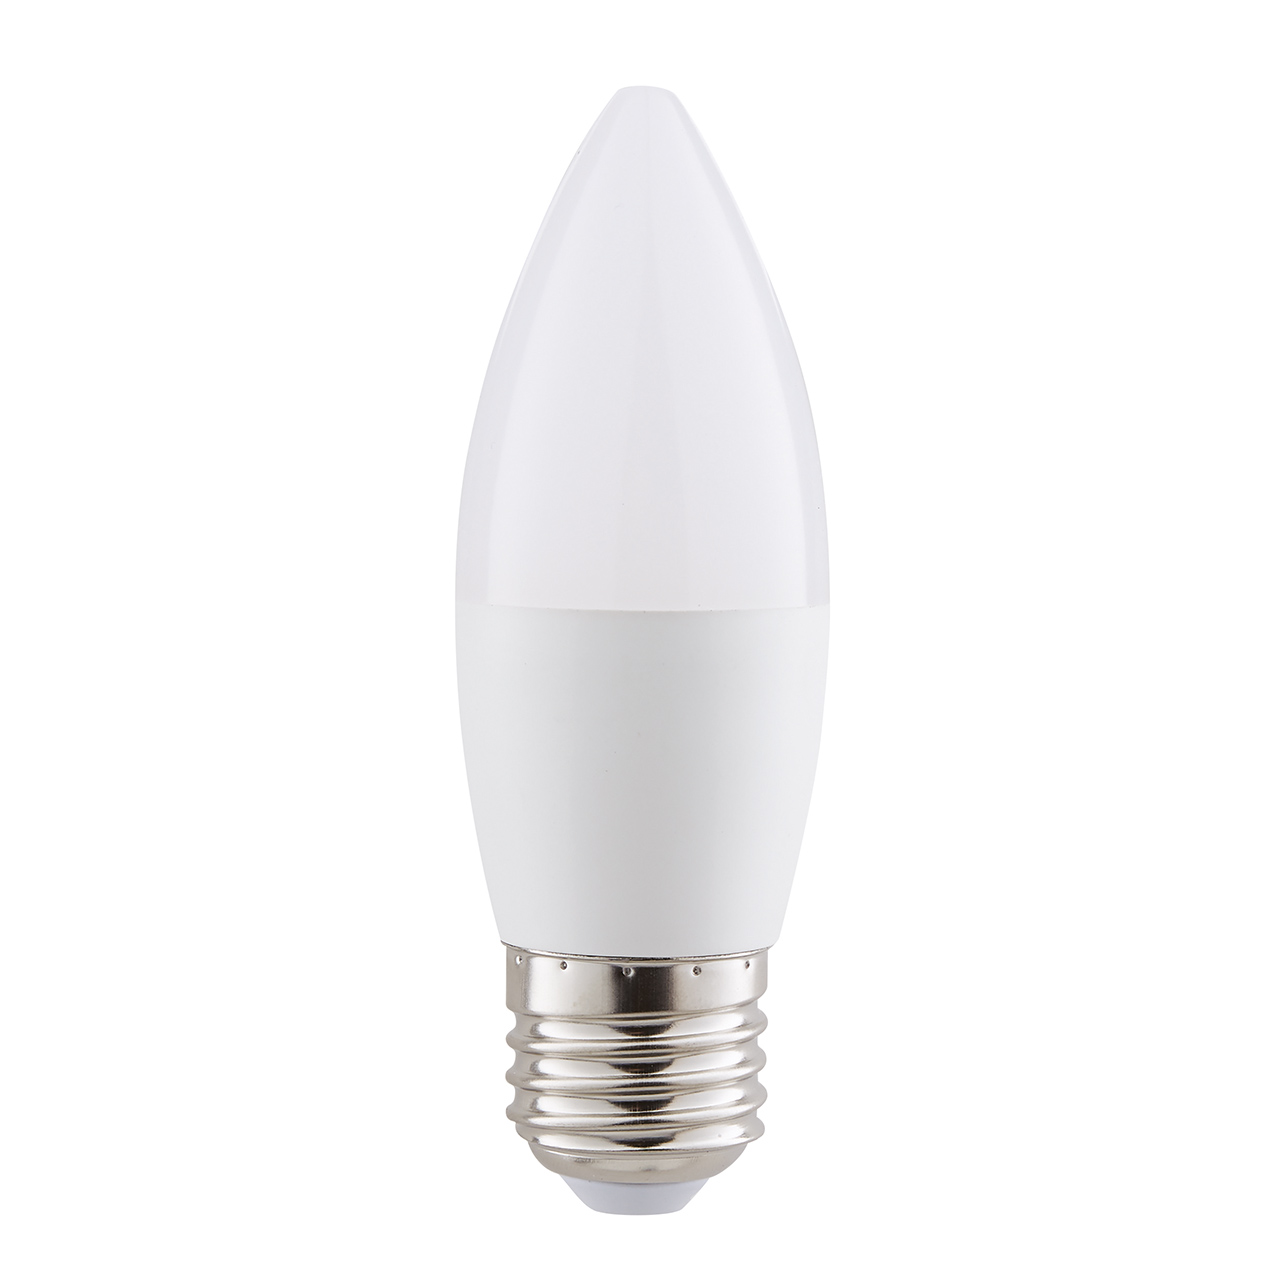 LED Candle Light Bulbs - Pack of 4